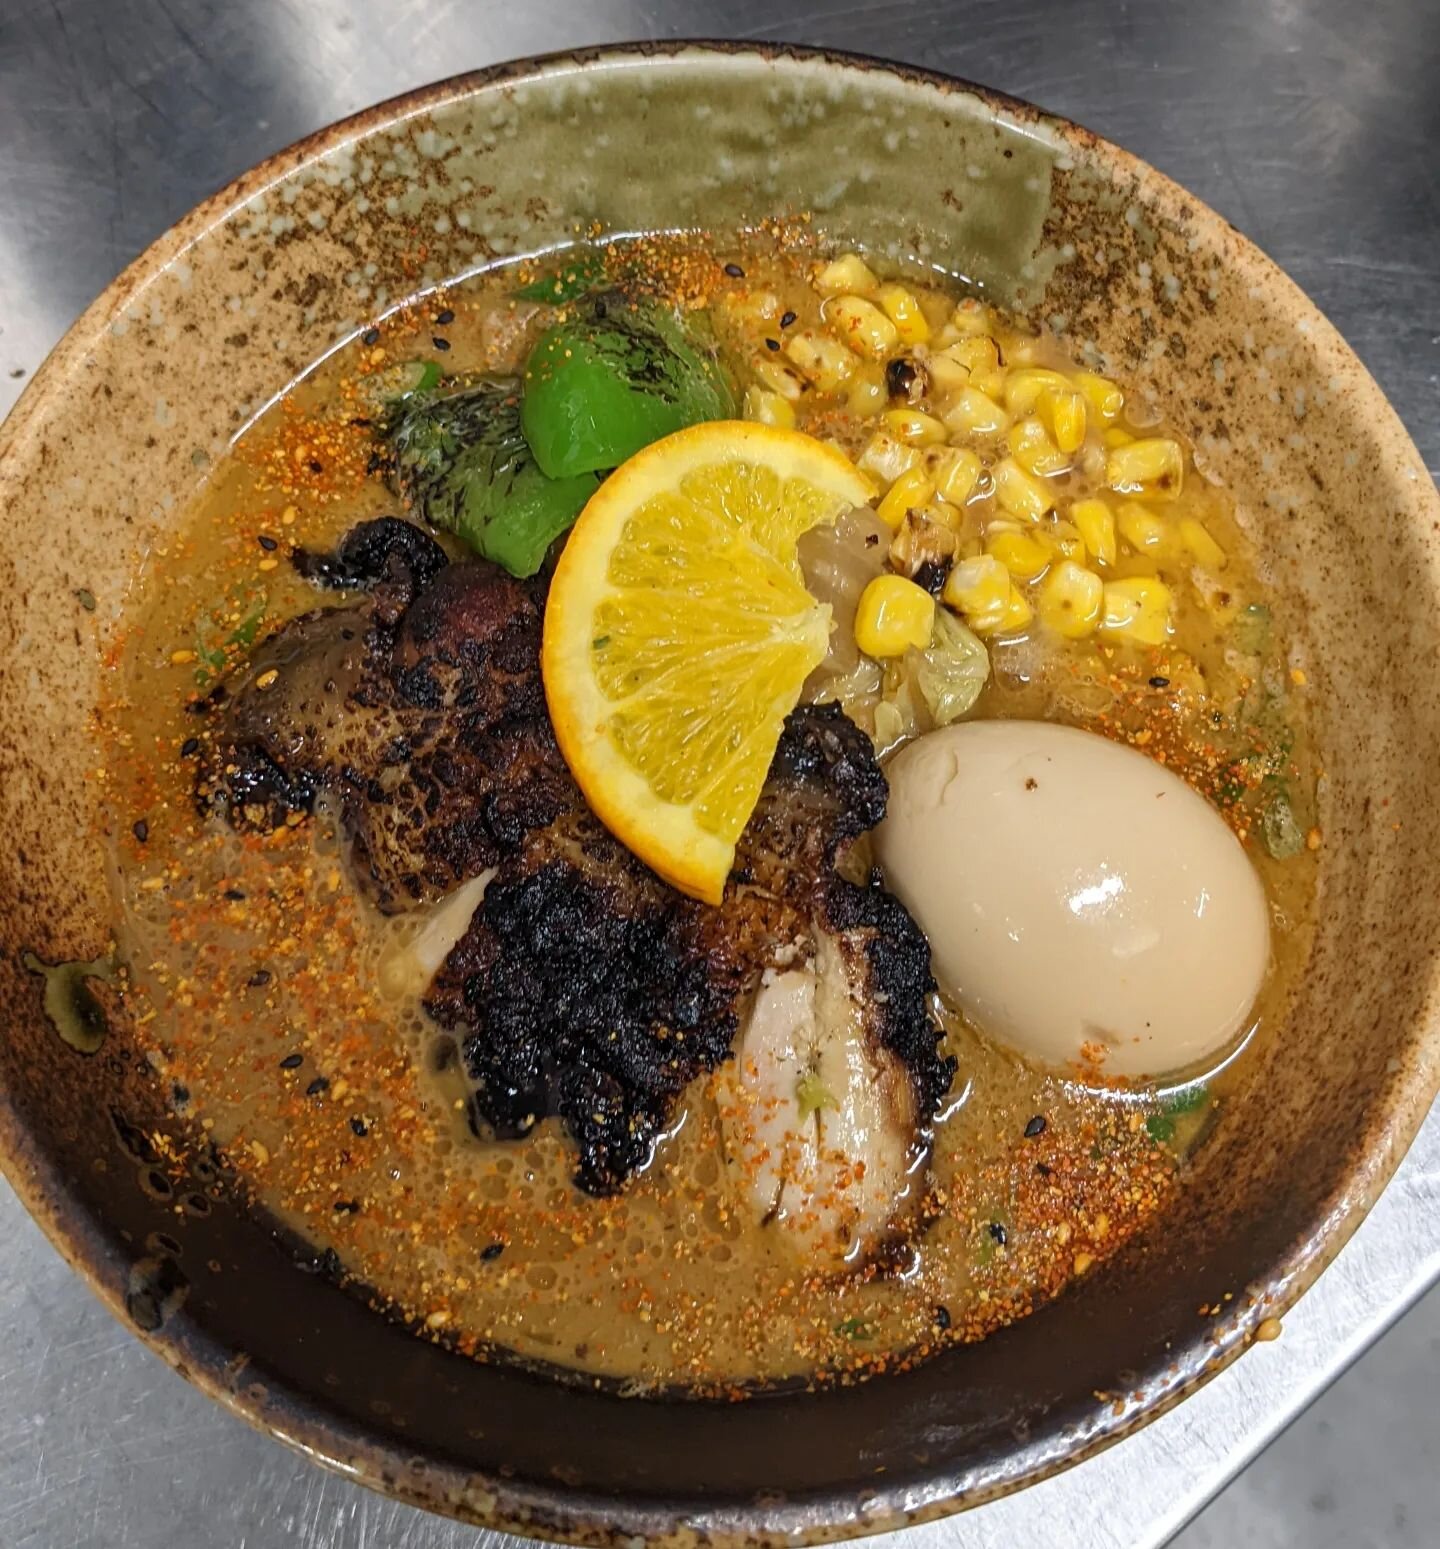 Shout out to chef @t___lui for coming up with our special for this and next week, this amazing jerk chicken shoyu. Needs to be tried.